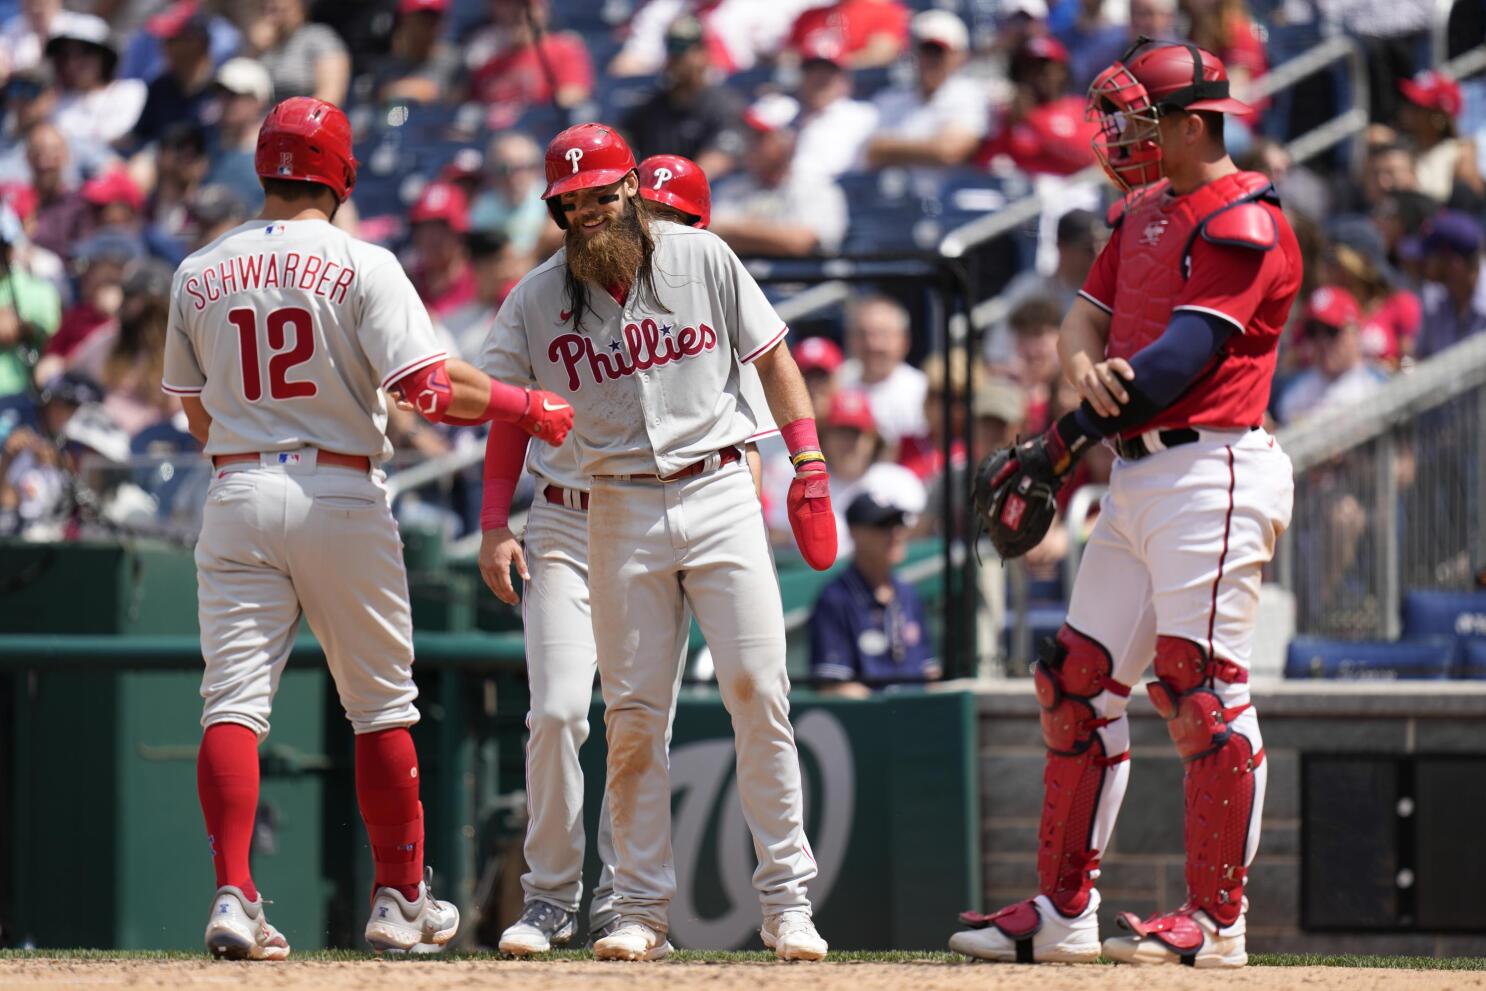 Washington Nationals: Kyle Schwarber won our hearts in just a few